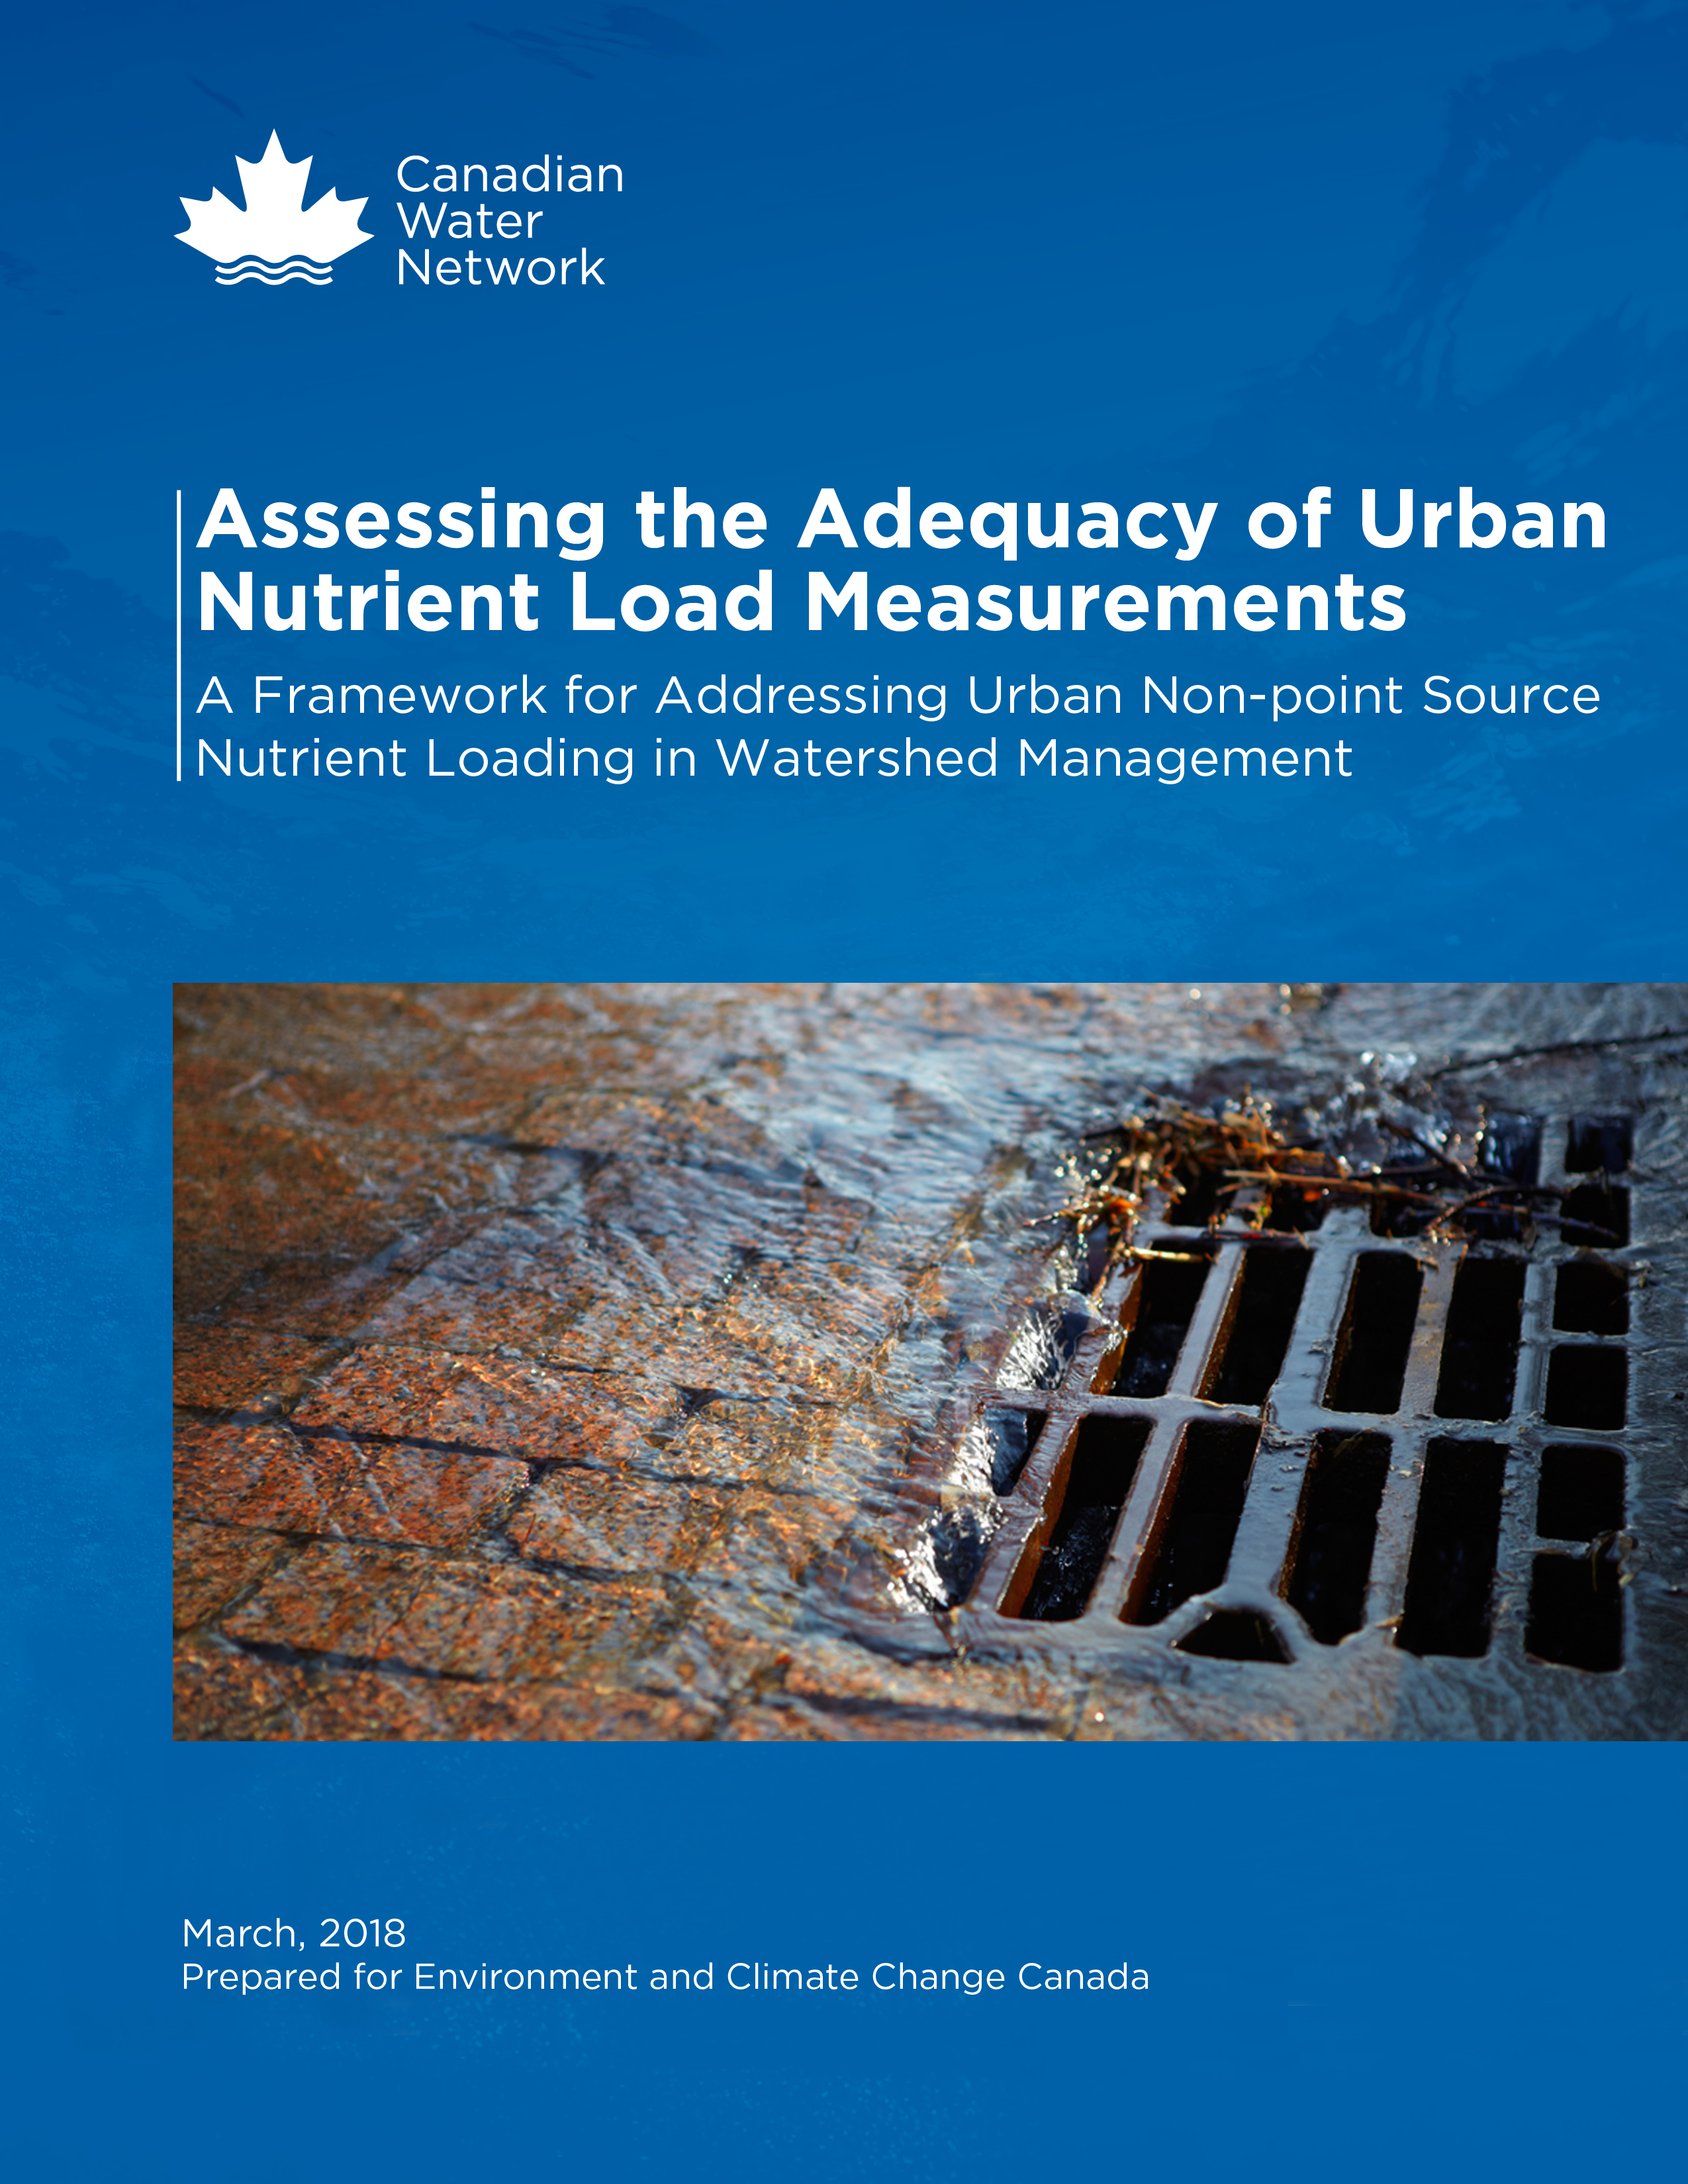 Assessing the Adequacy of Urban Nutrient Load Measurements, Synthesis Report 2018